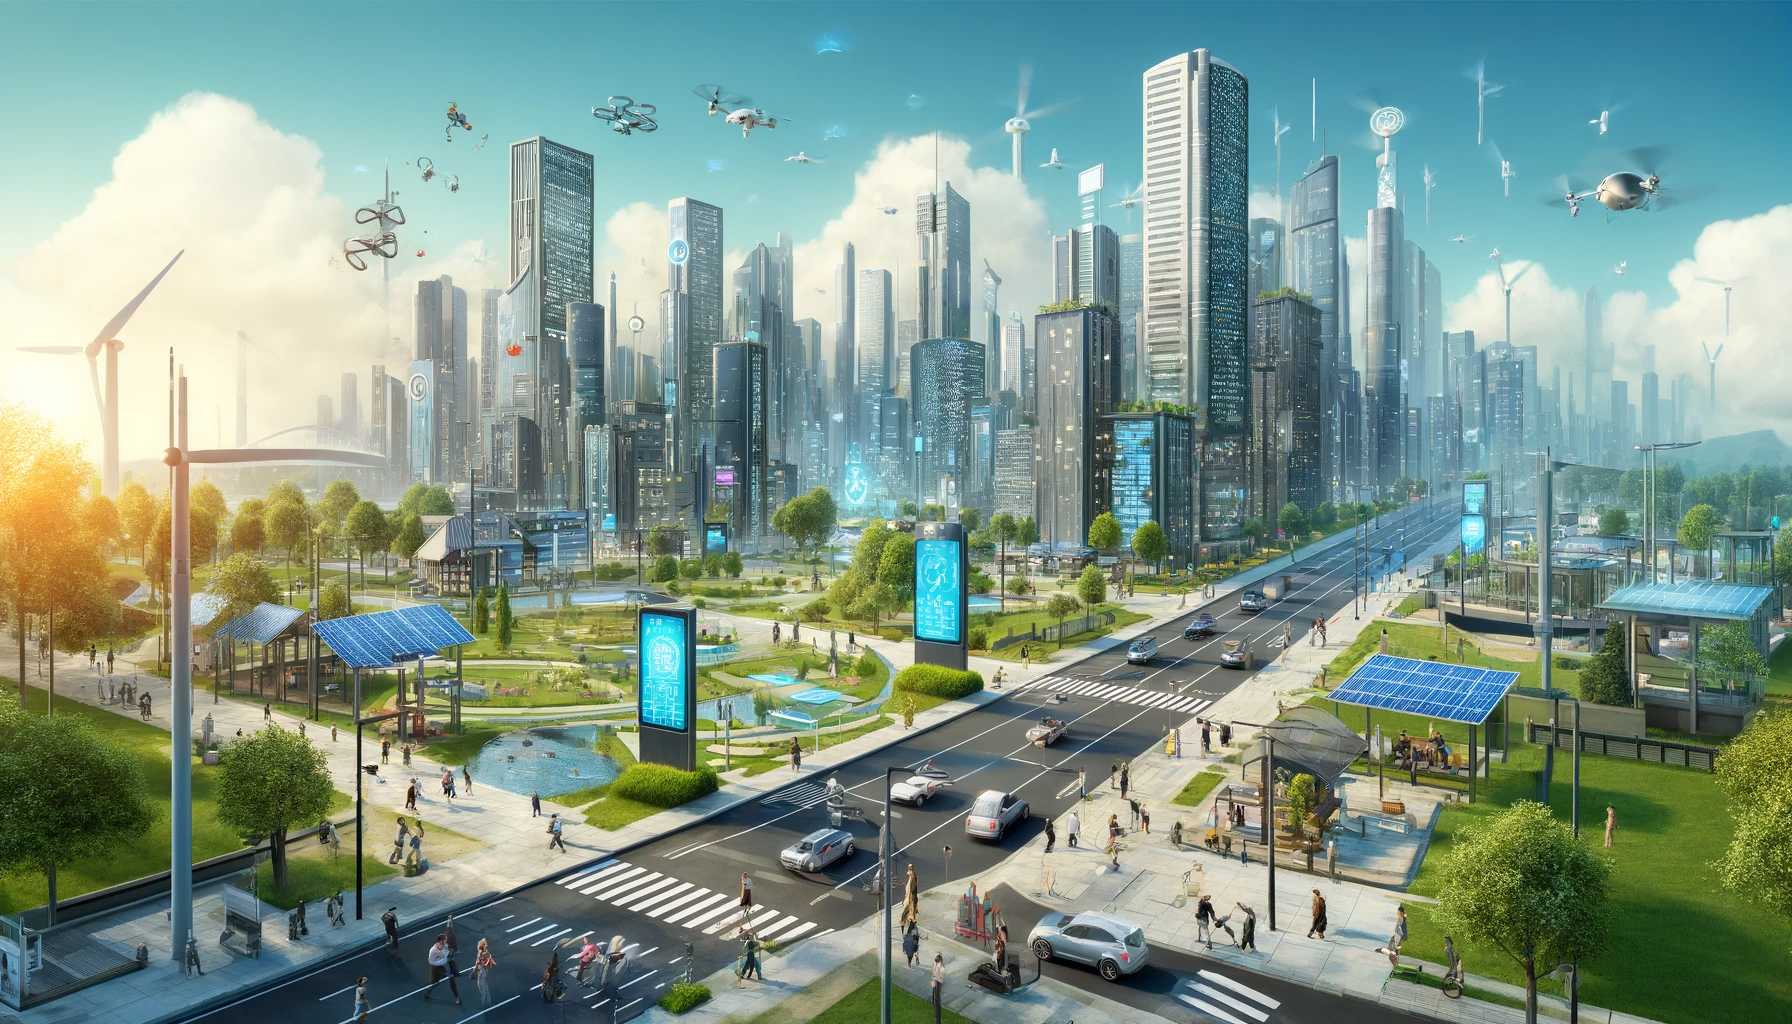 THE SMART CITIES